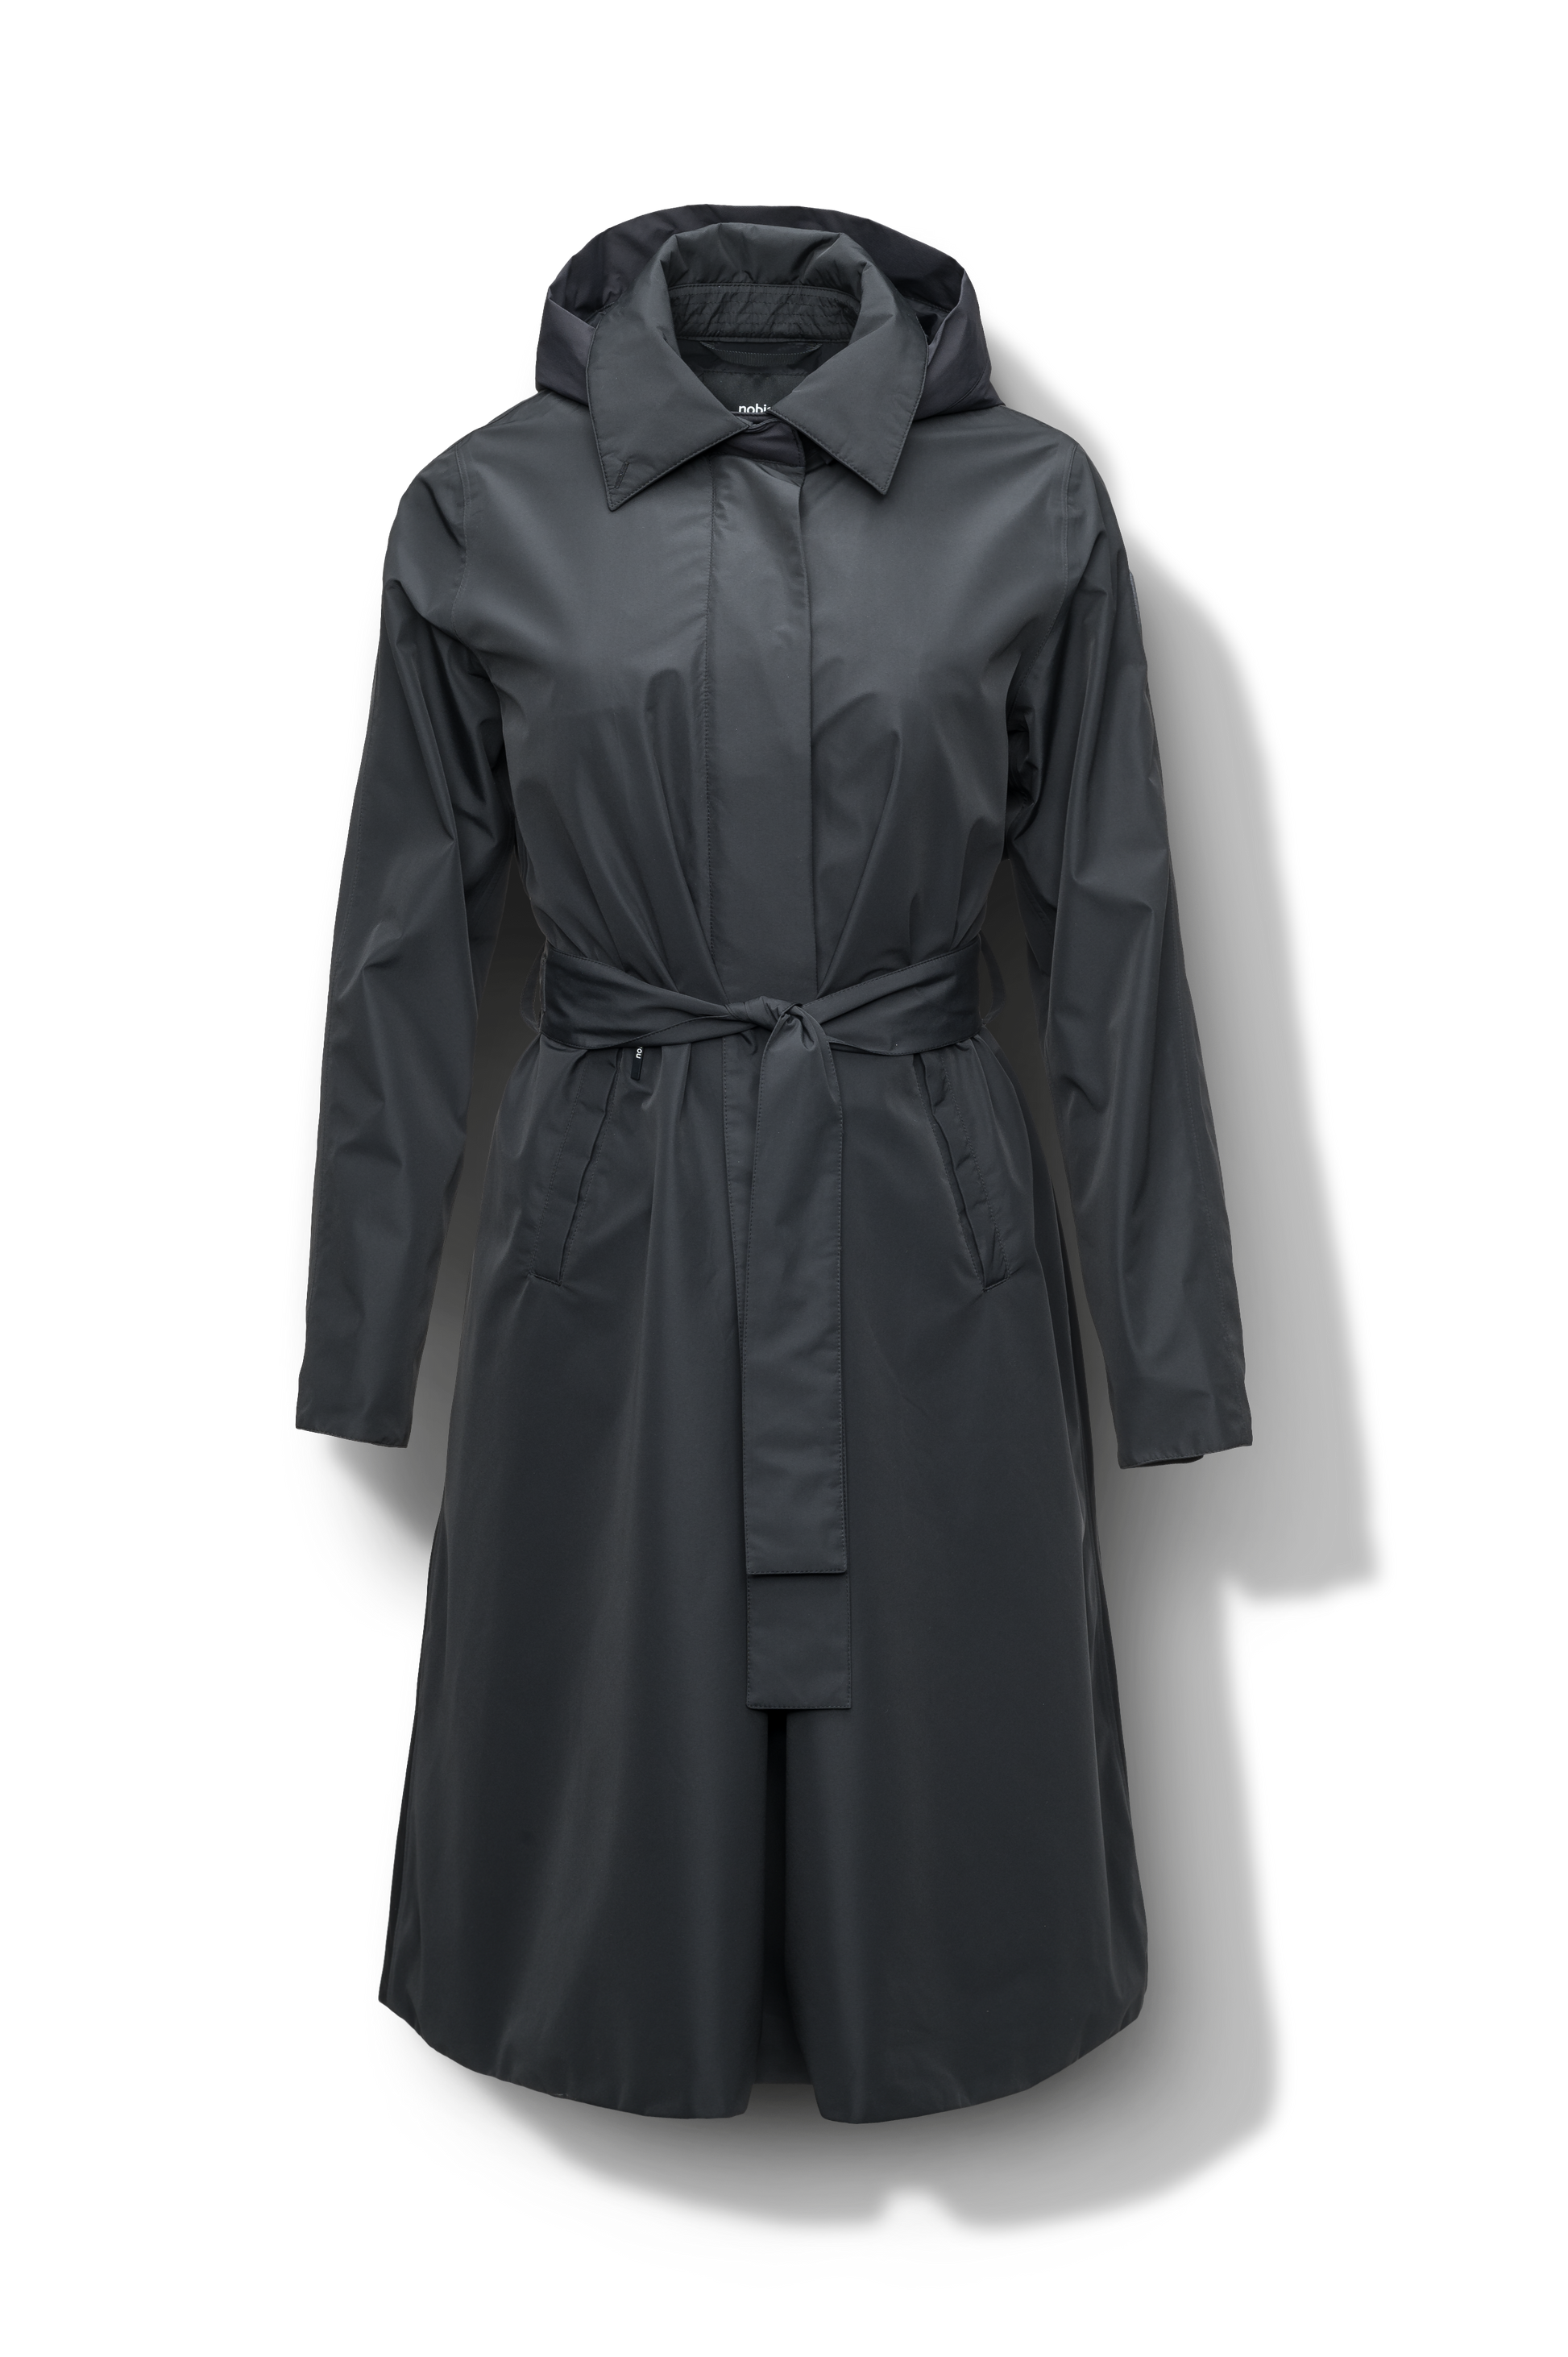 Ivy Ladies Tailored Trench Coat in knee length, 3-Ply Micro Denier fabrication, retractable non-removable hood, front wind flap with snap button closure, removable belt, and adjustable snap cuffs, in Black